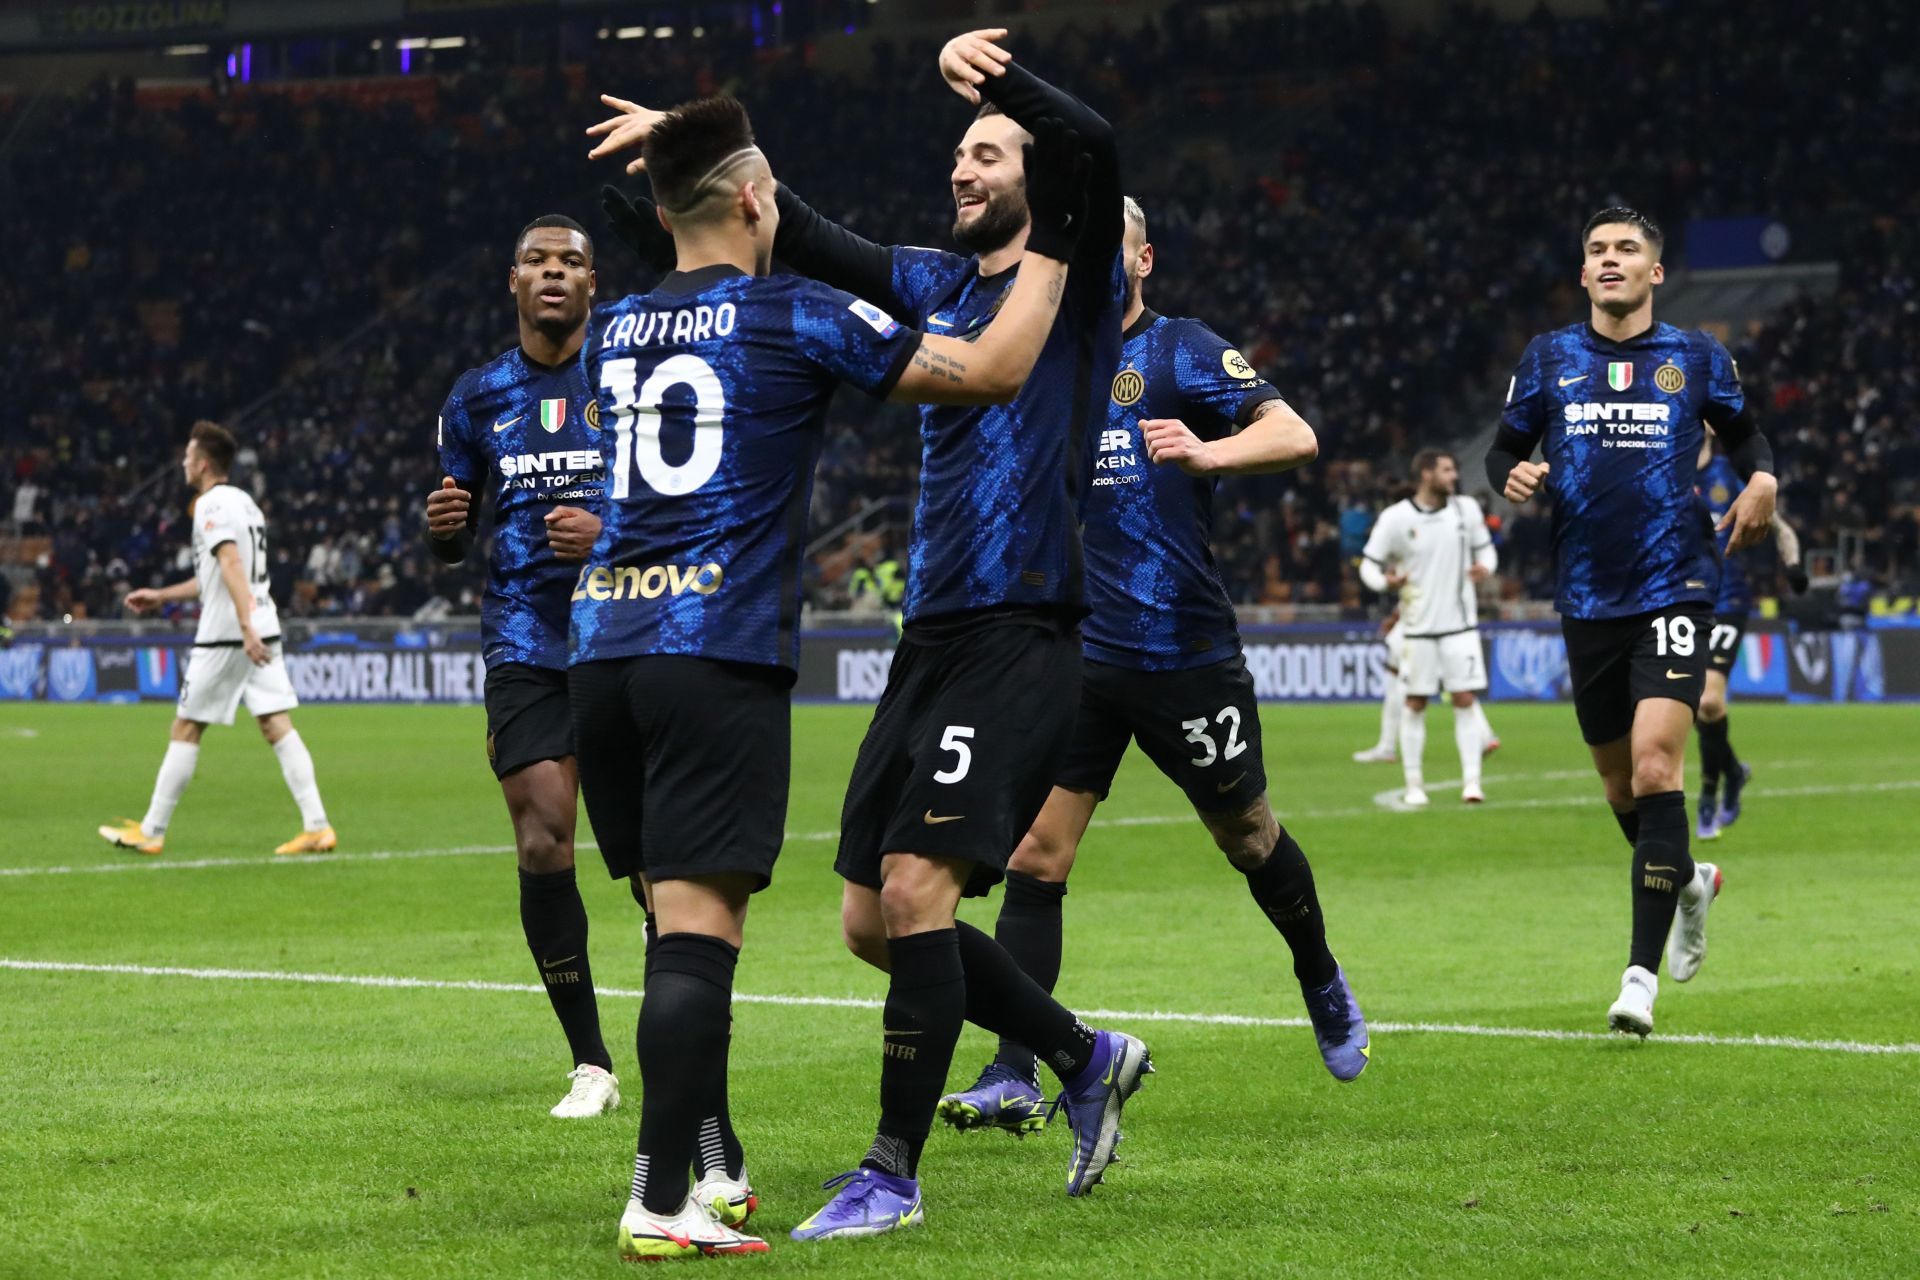 Inter Milan have fared well despite their recent financial woes.